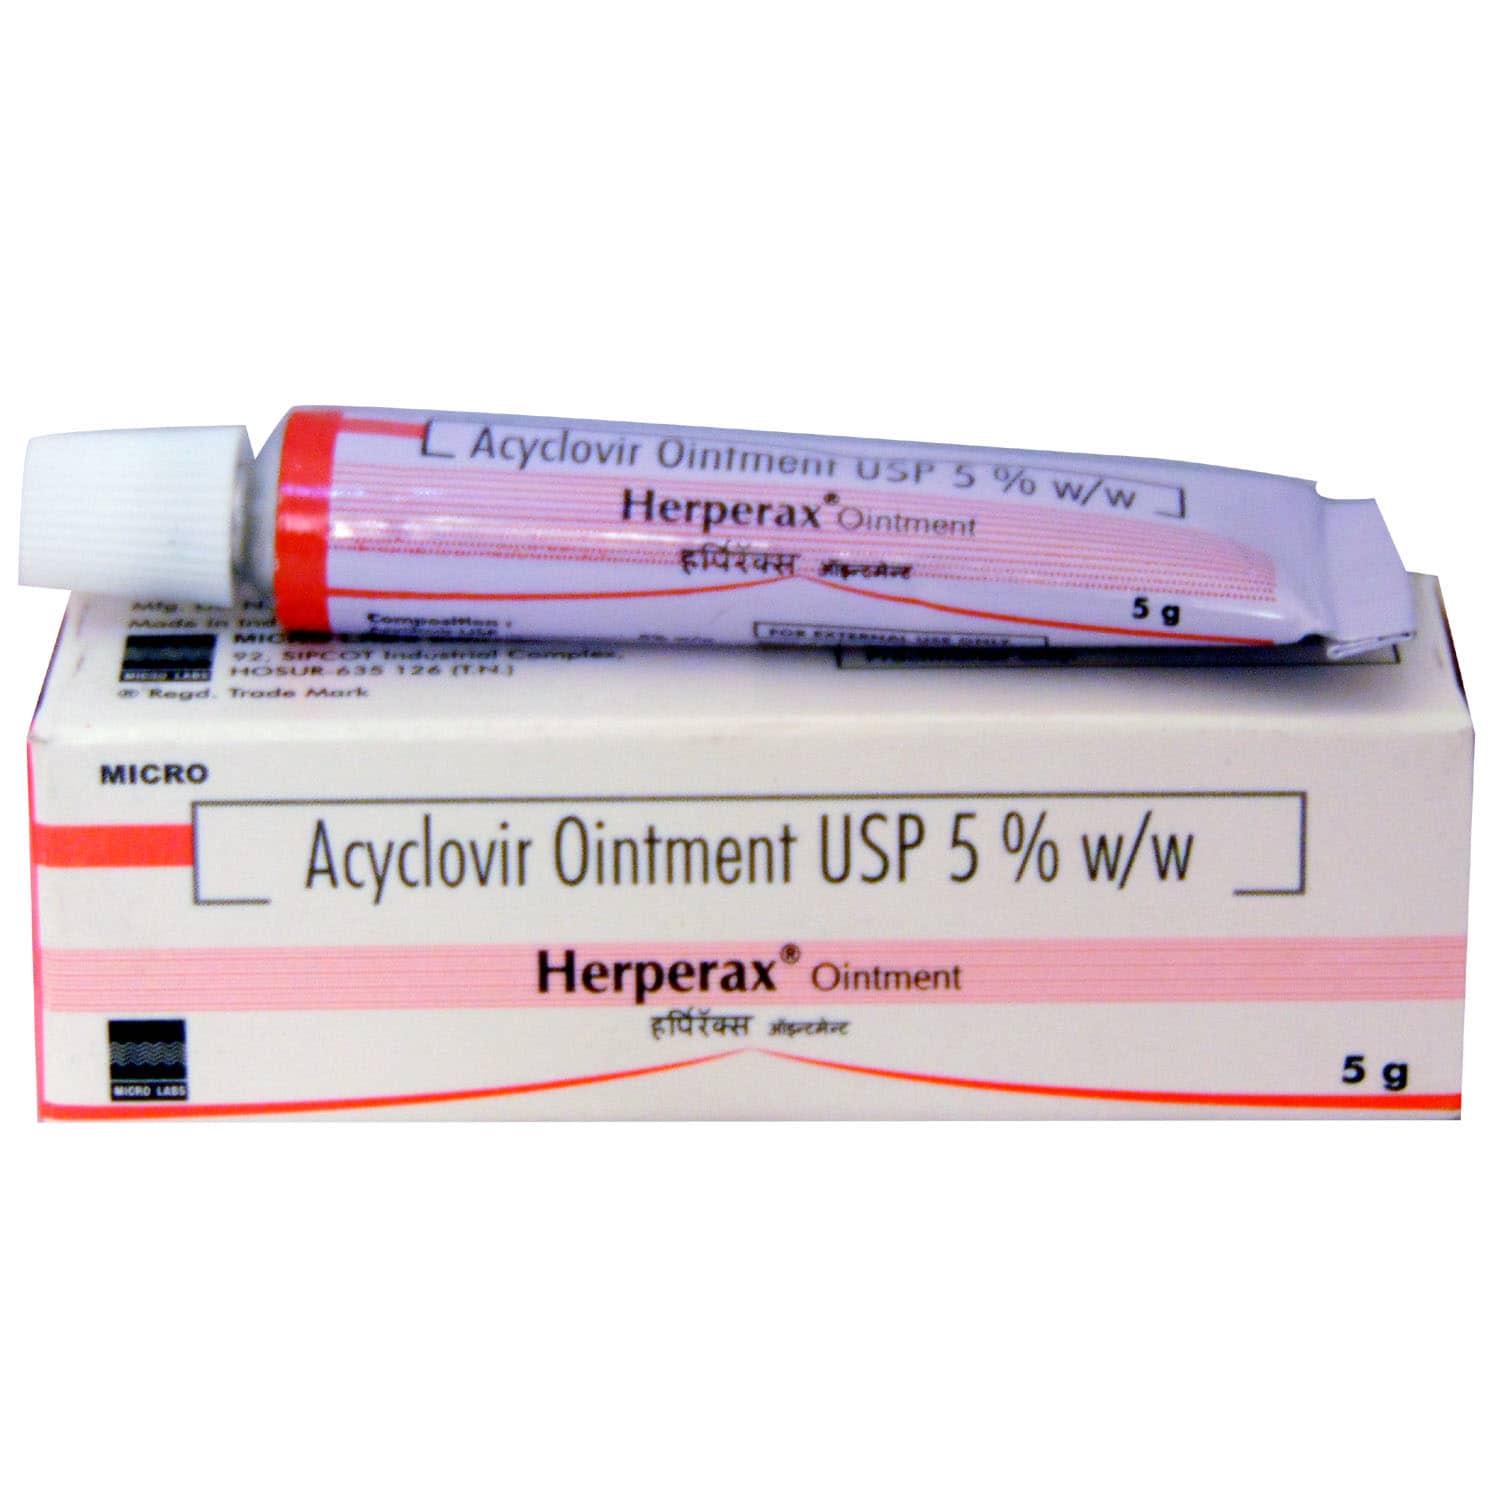 Herperax Ointment 5 gm Price, Uses, Side Effects, Composition